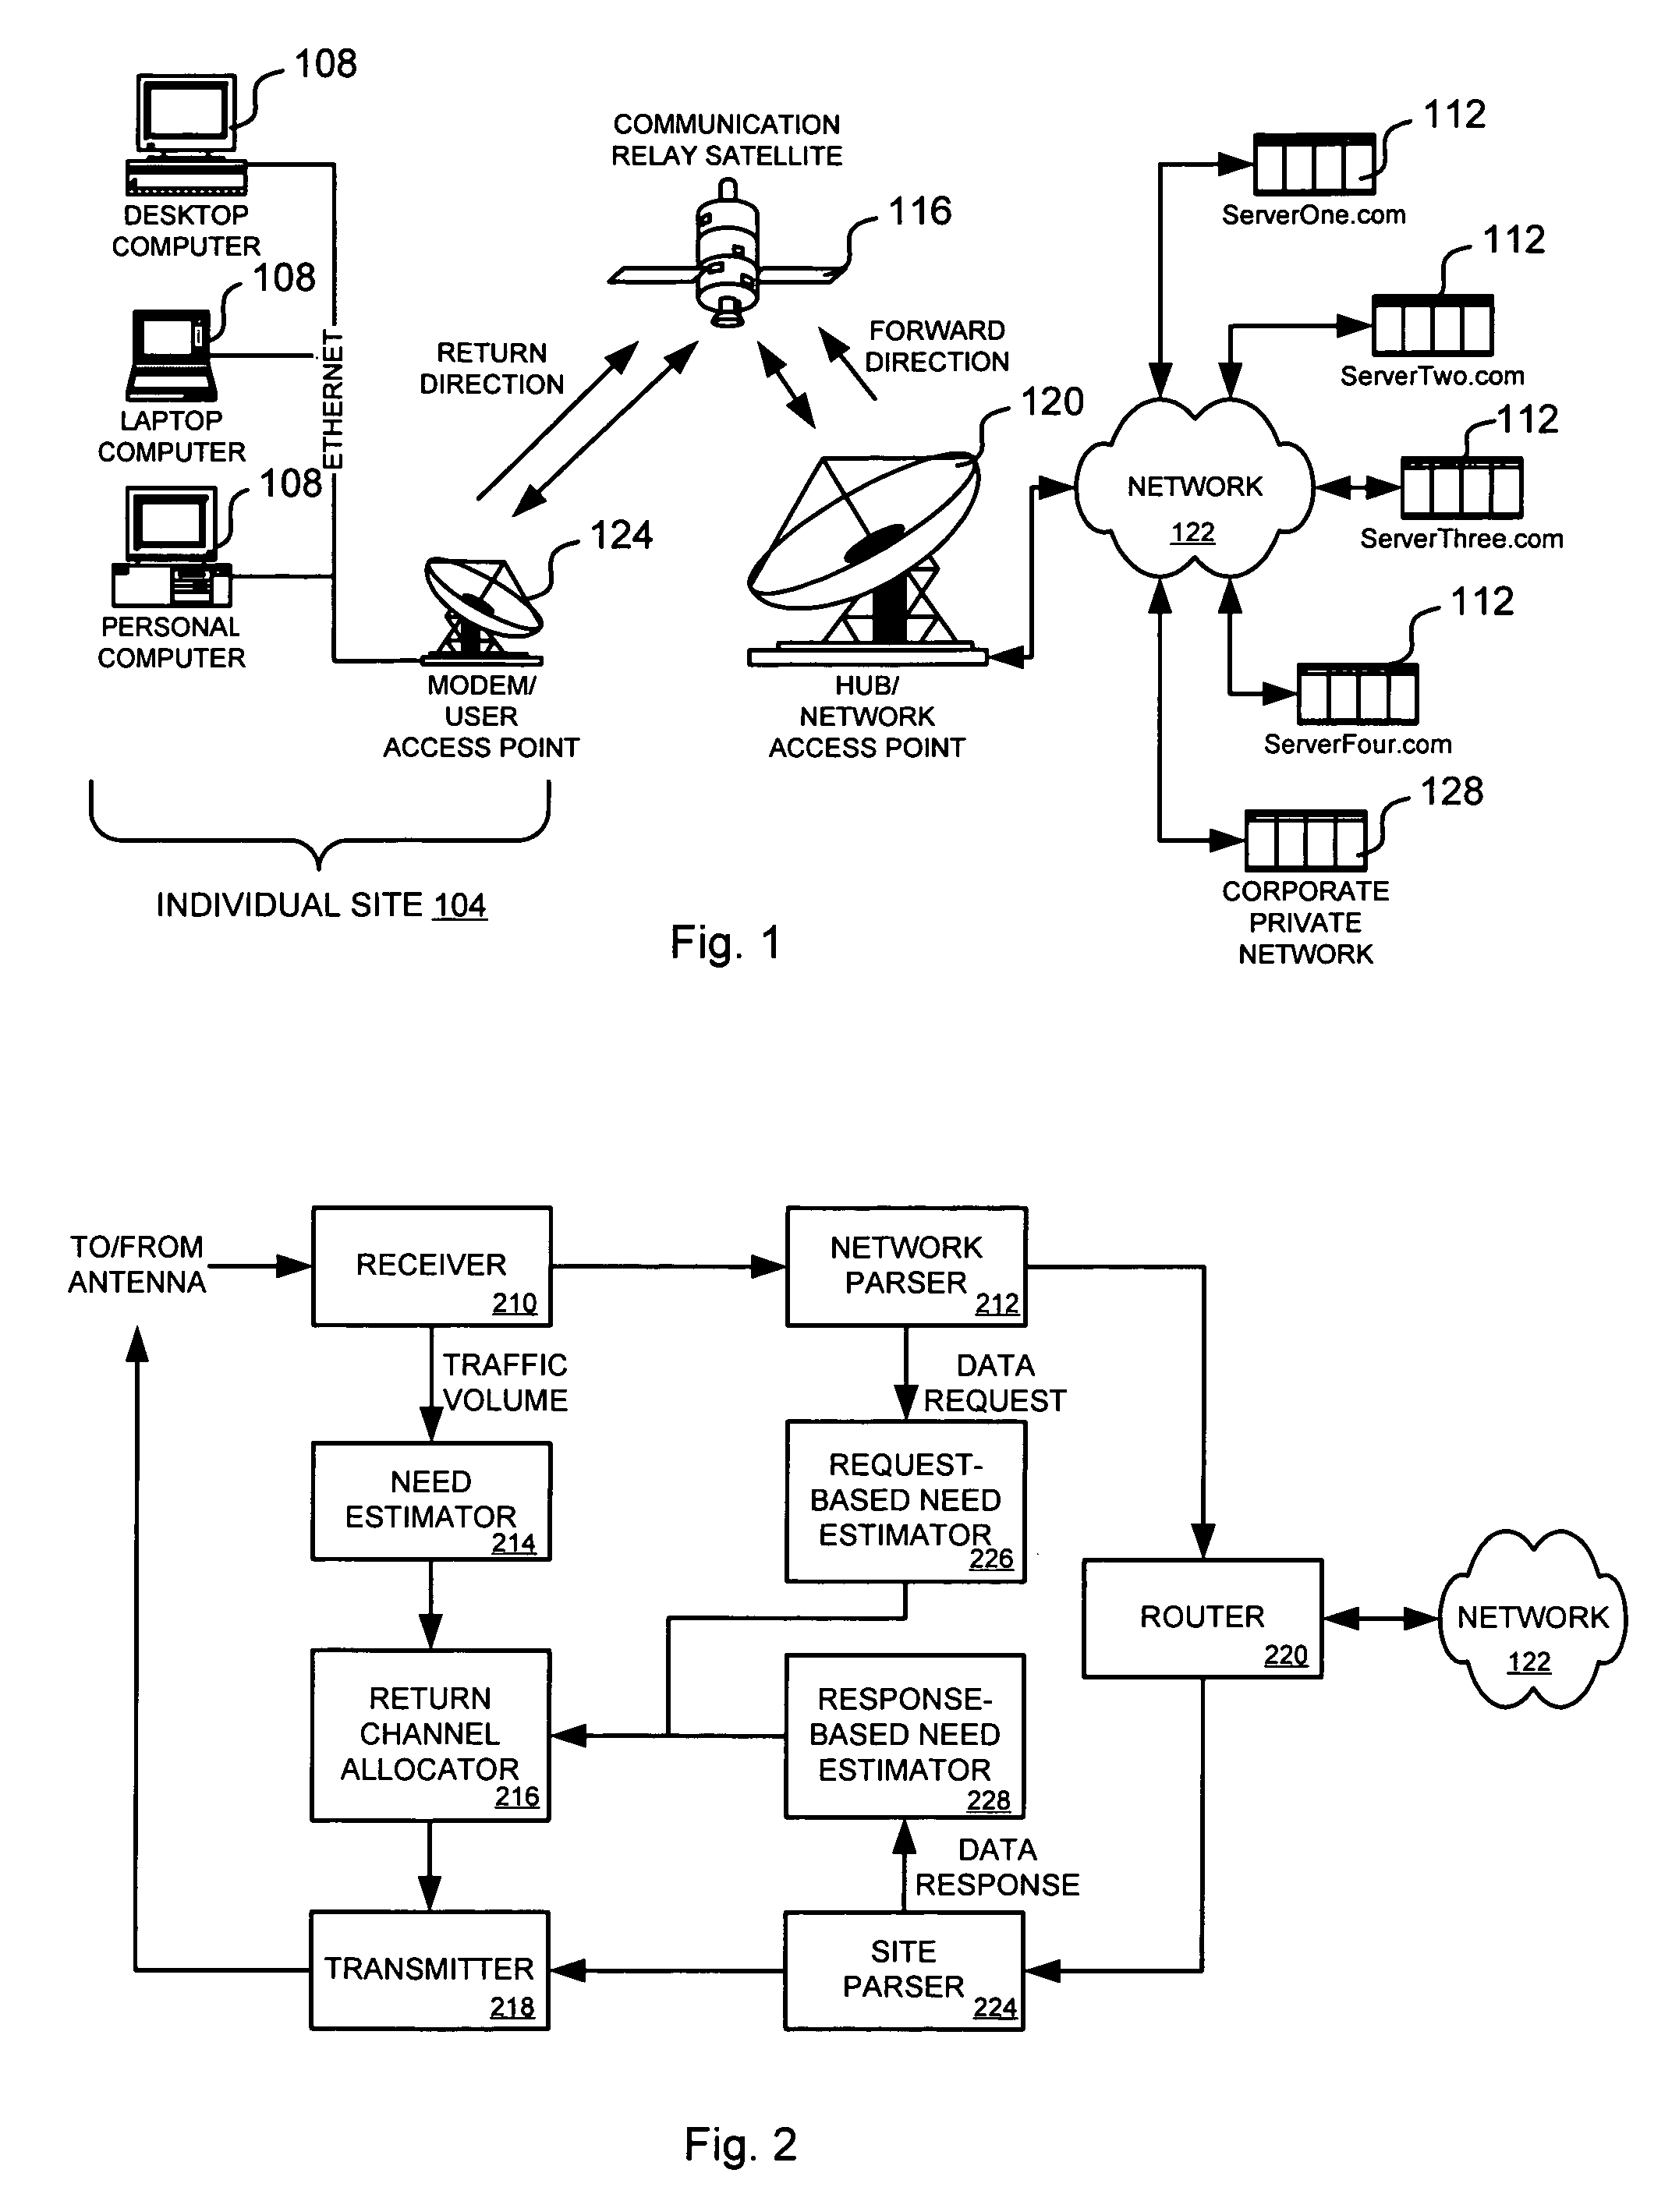 Network accelerator for controlled long delay links